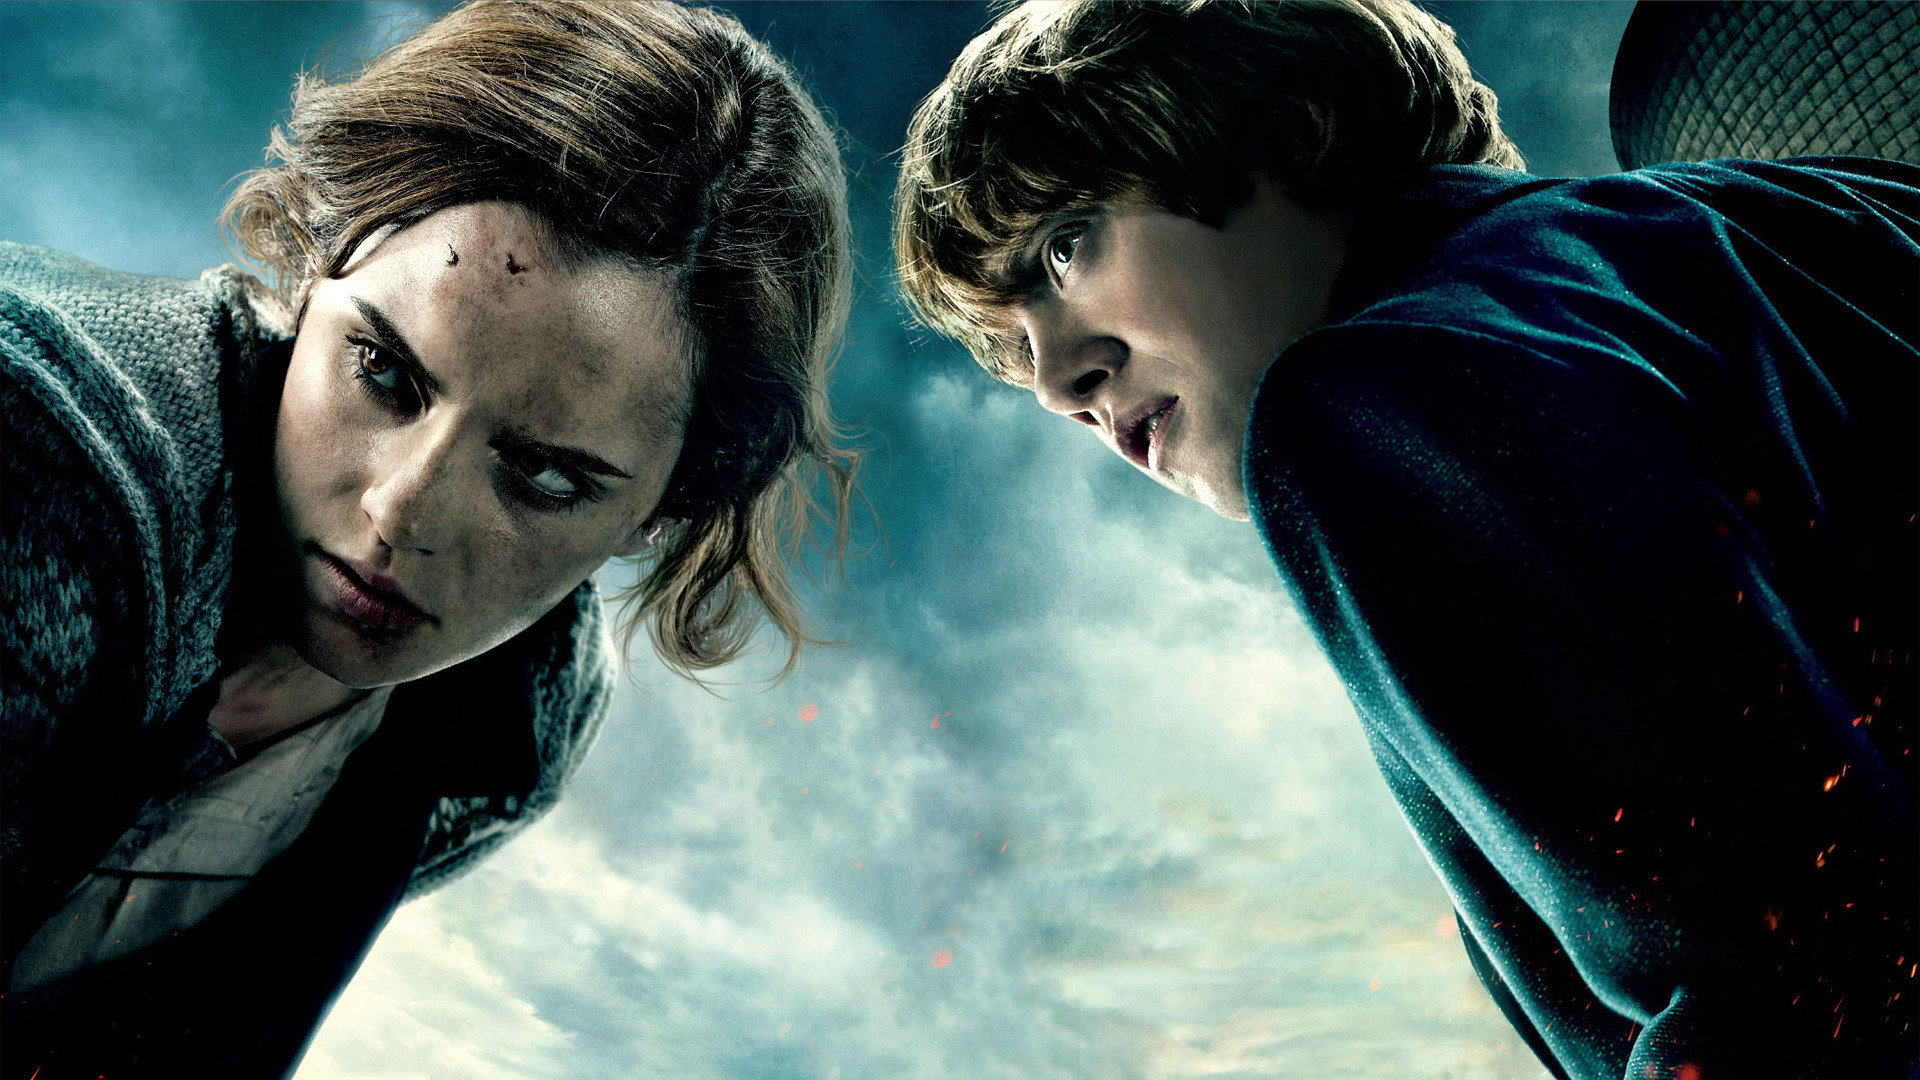 Harry Potter Deathly Hallows Part 1 Torrent Download Full Movie